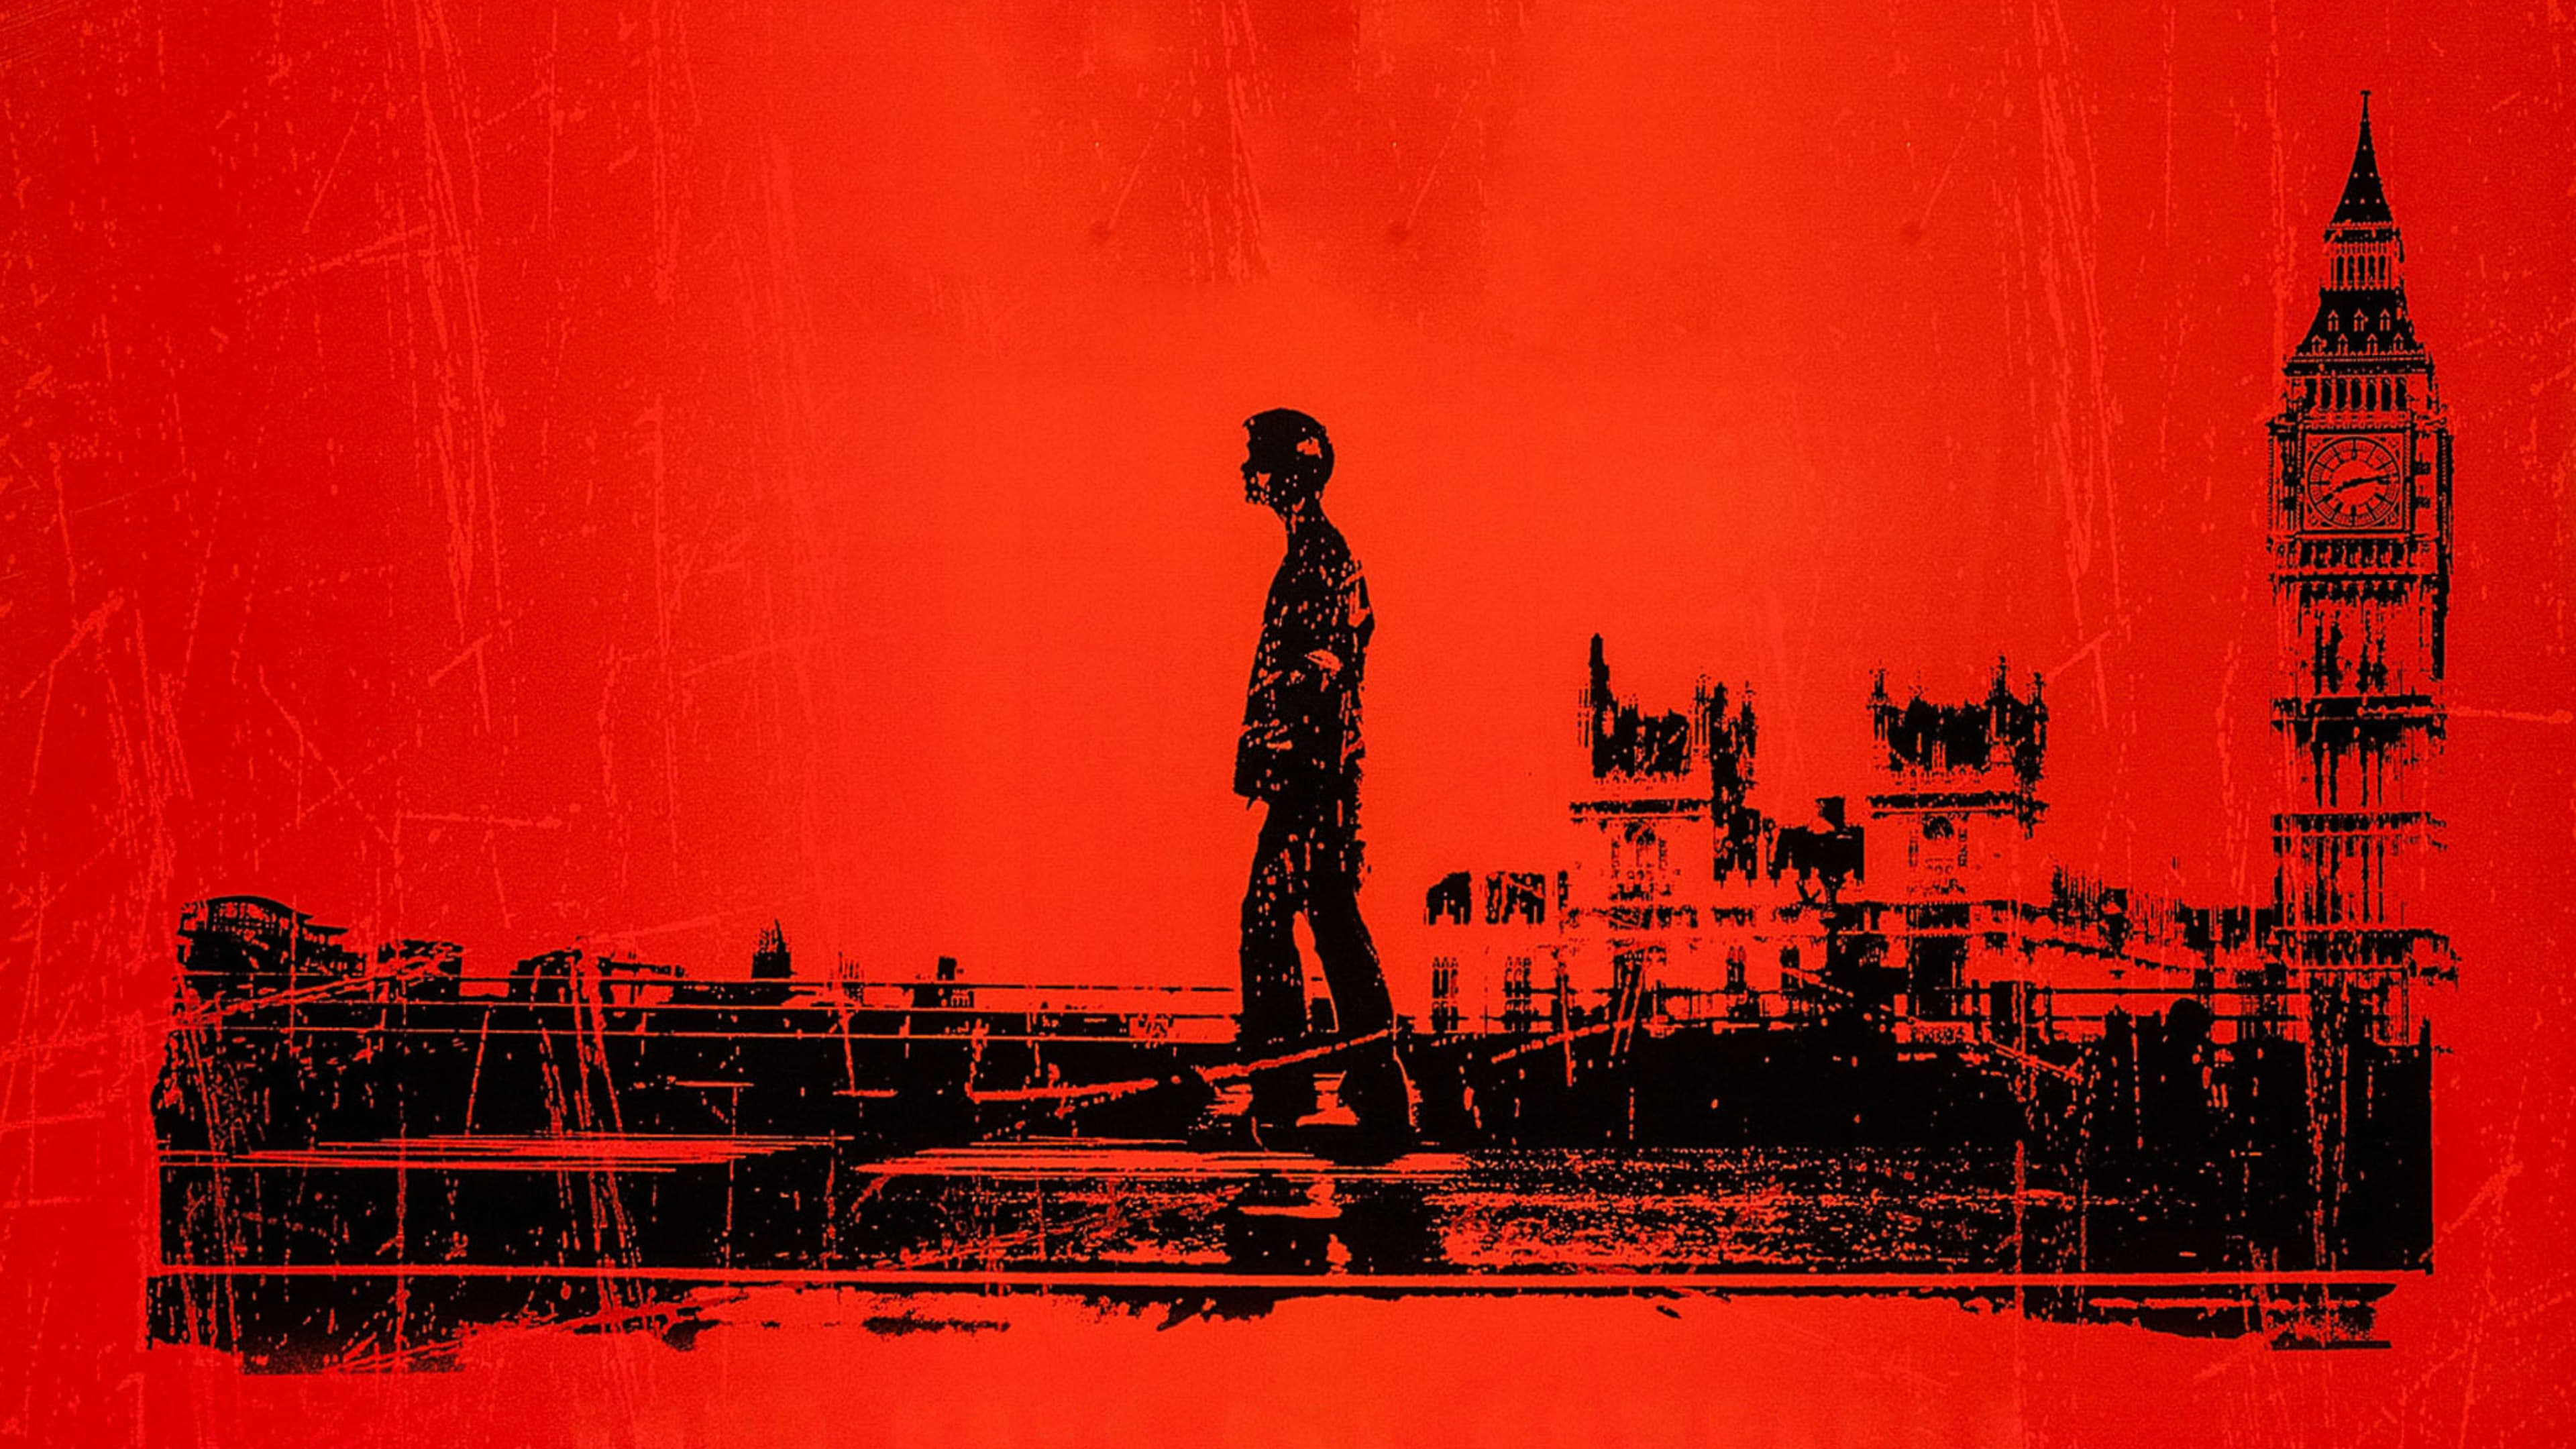 28 Days Later (2002)